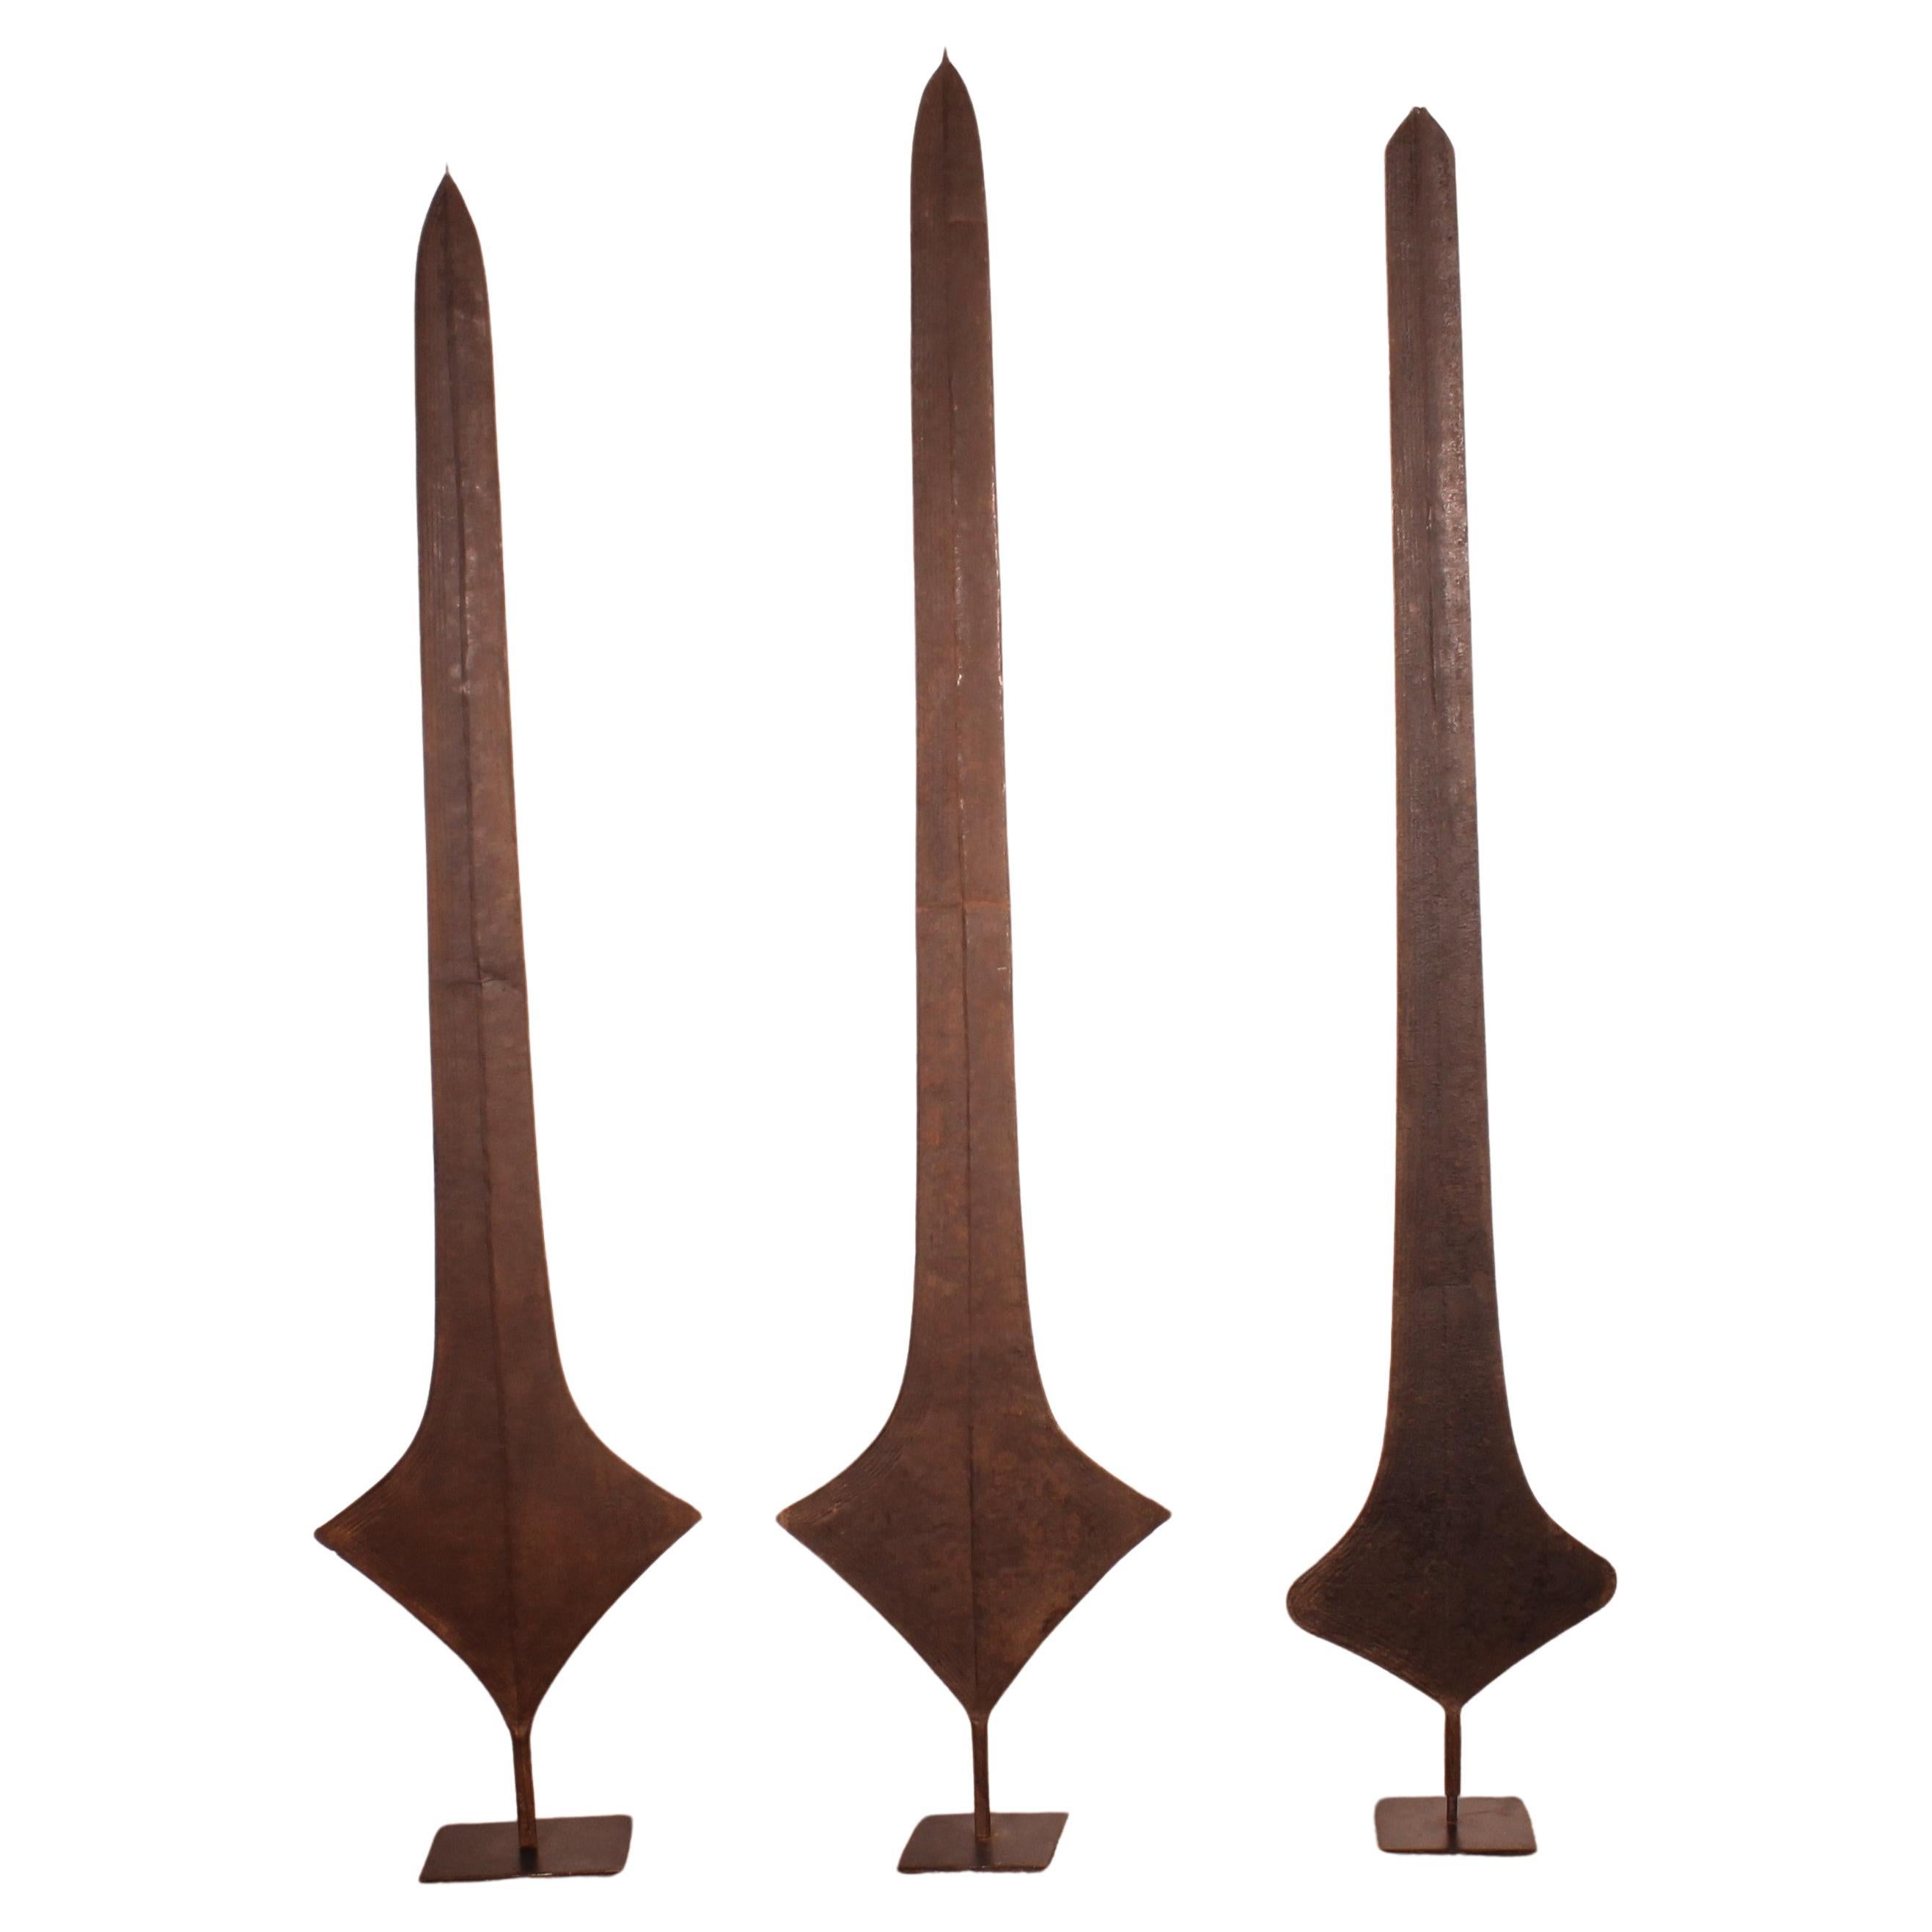 Three African Topoke Sword Currency On Custom Stands